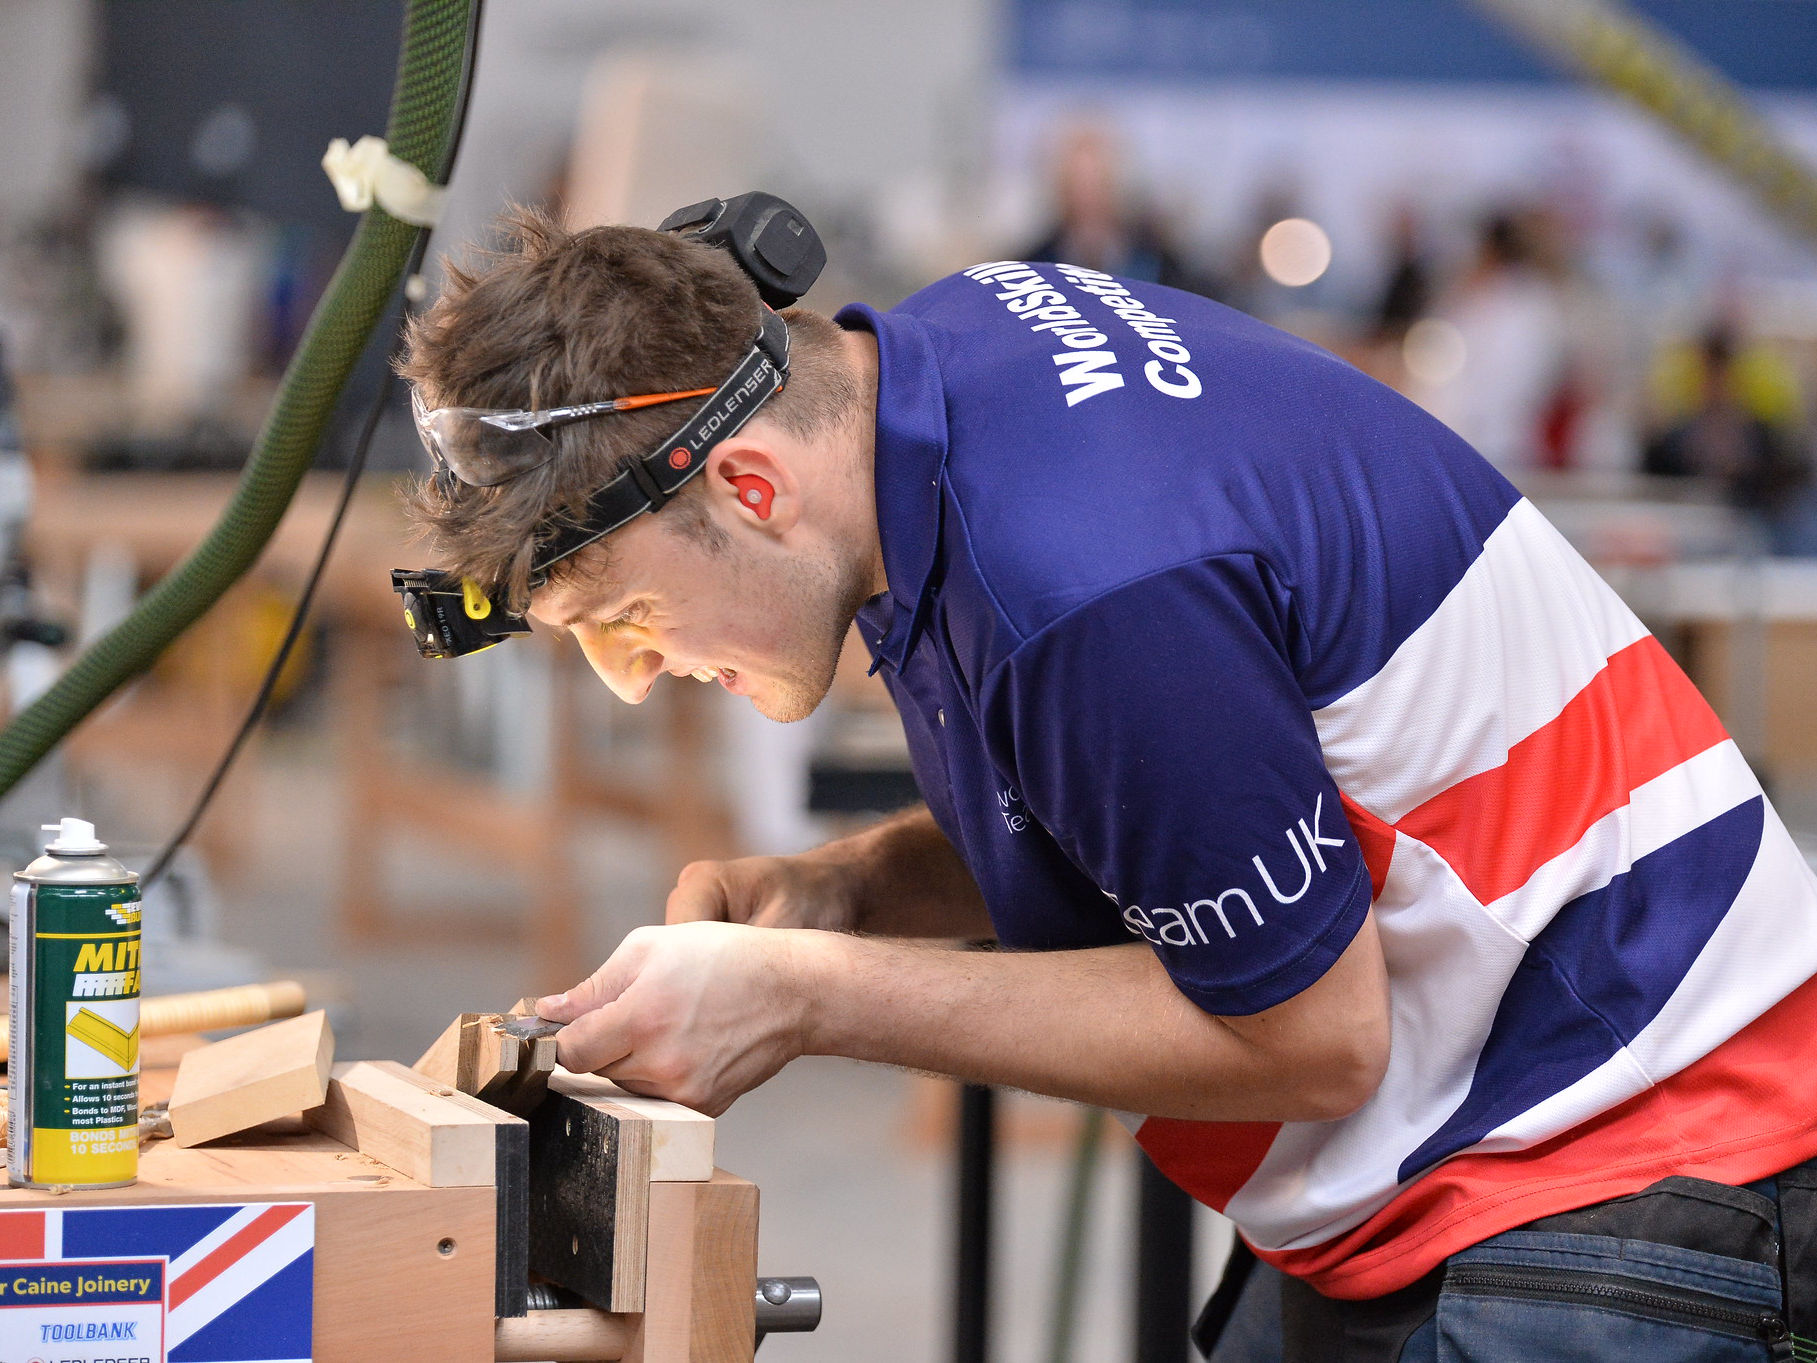 A joinery competitor from the UK at WorldSkills Kazan 2019.